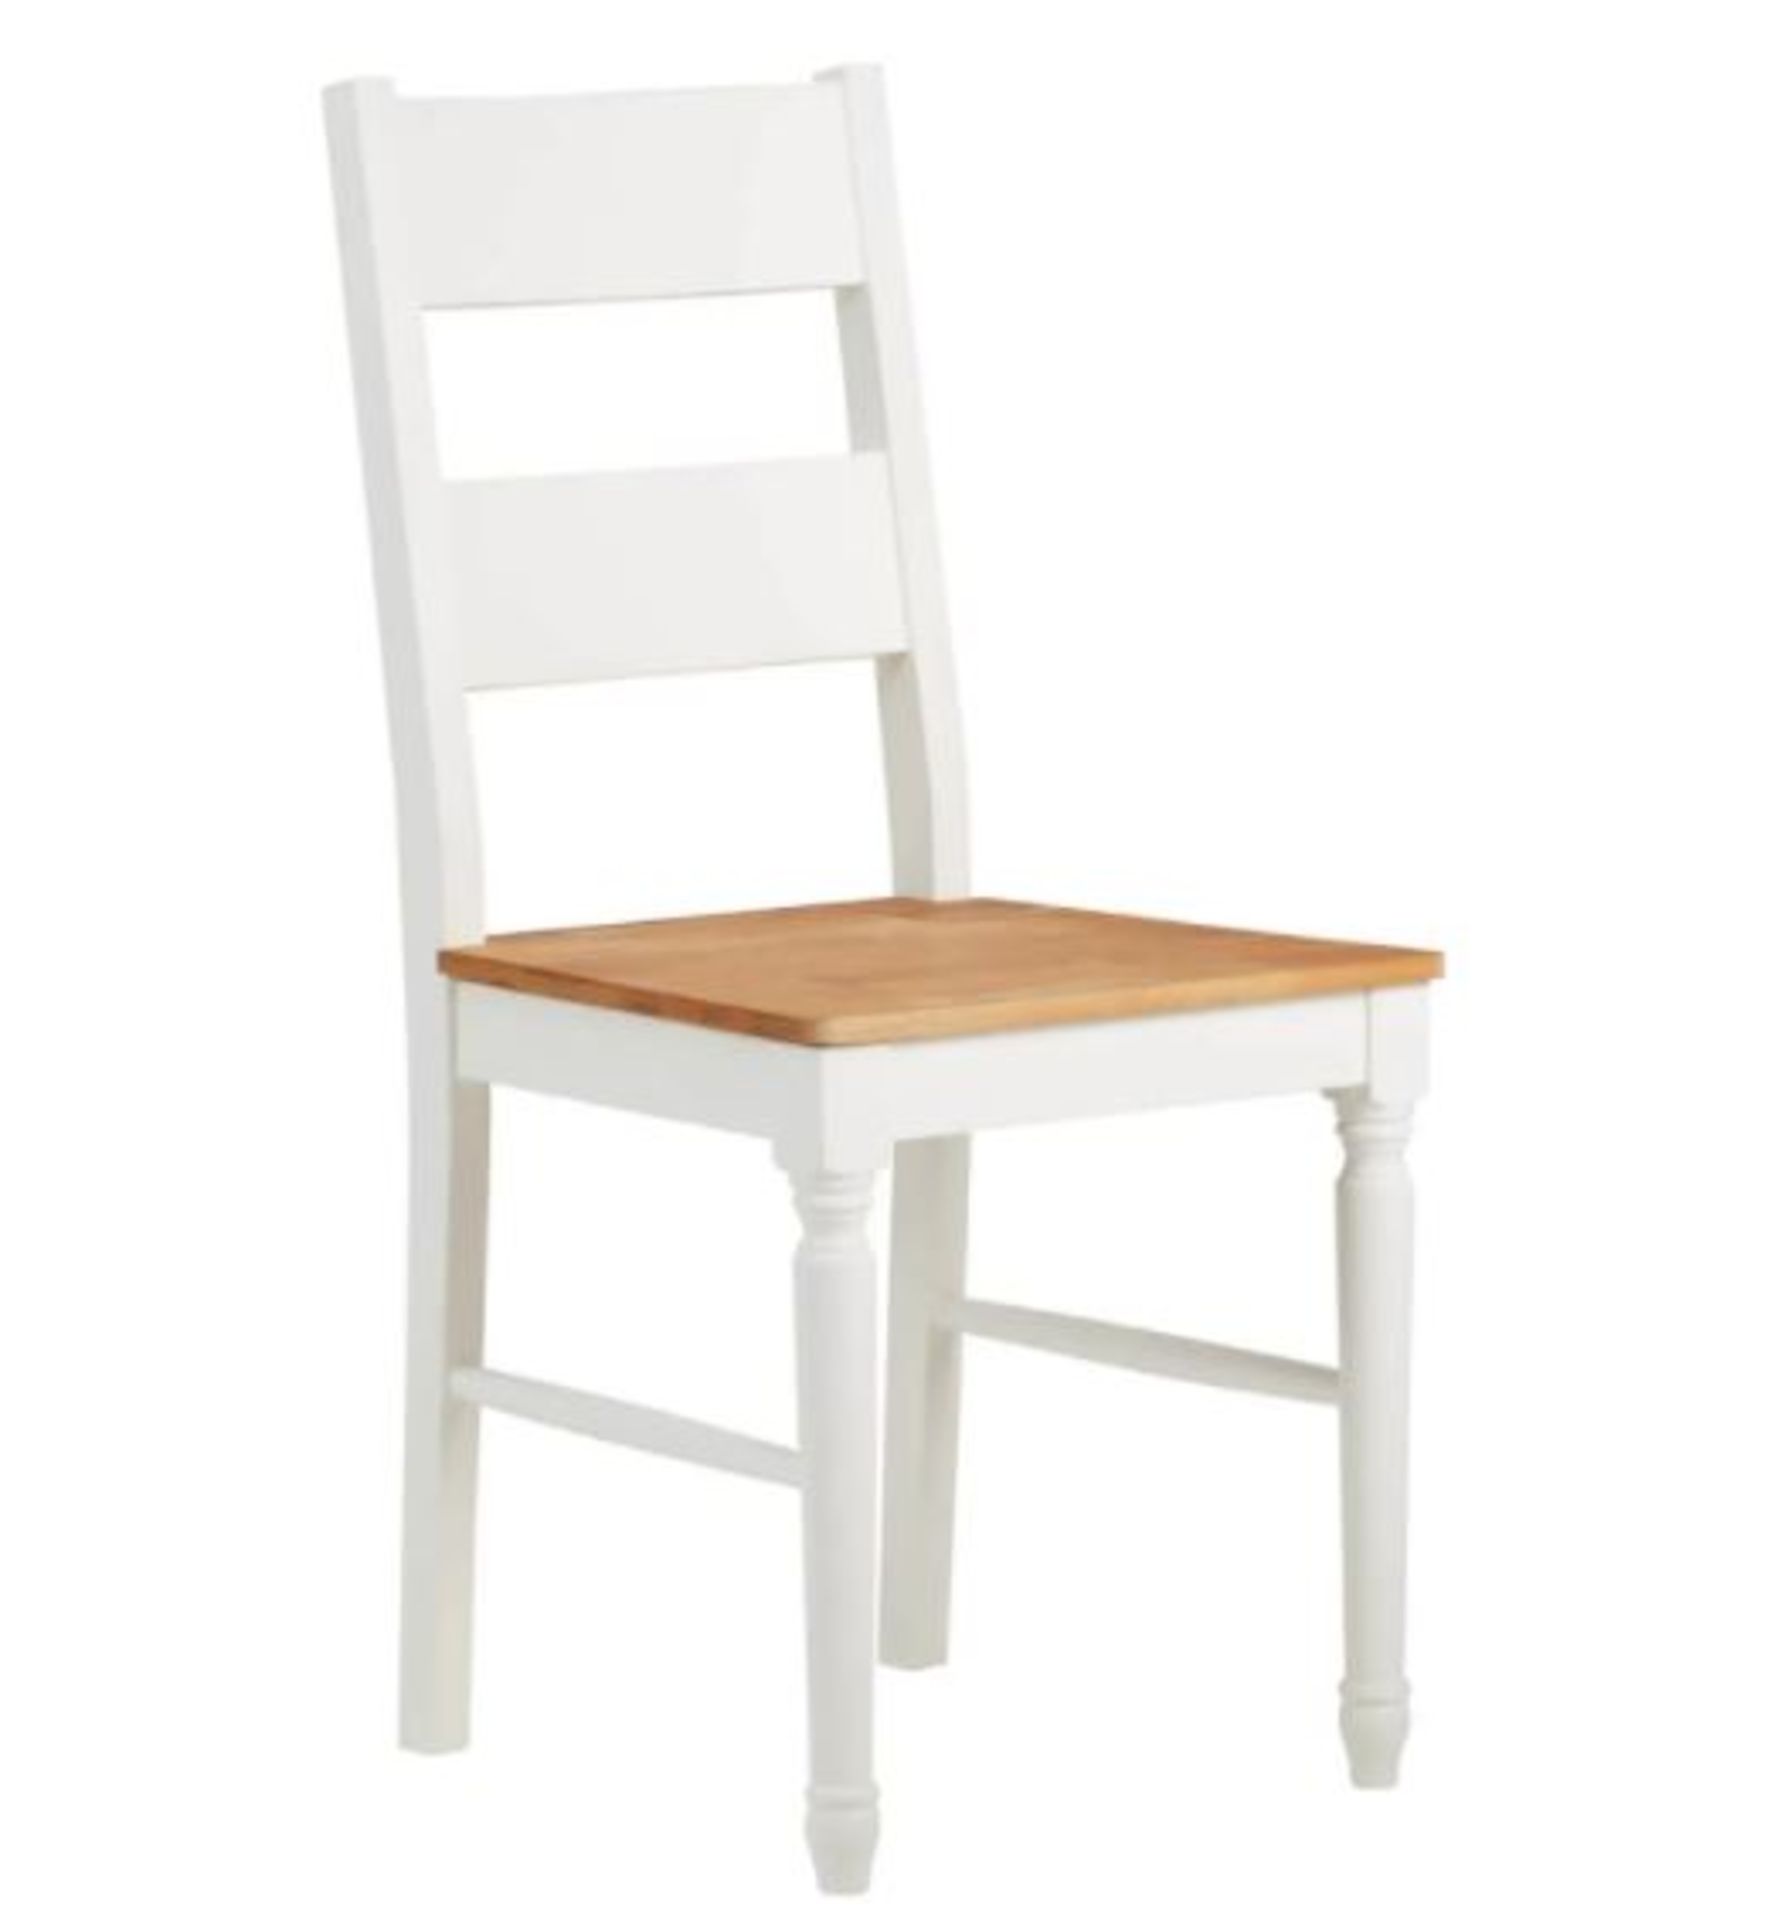 (R7G) 2x Laura Ladder Back Dining Chairs RRP £125. Solid Oak Seat. White Painted Pine Wood Legs. - Image 2 of 8